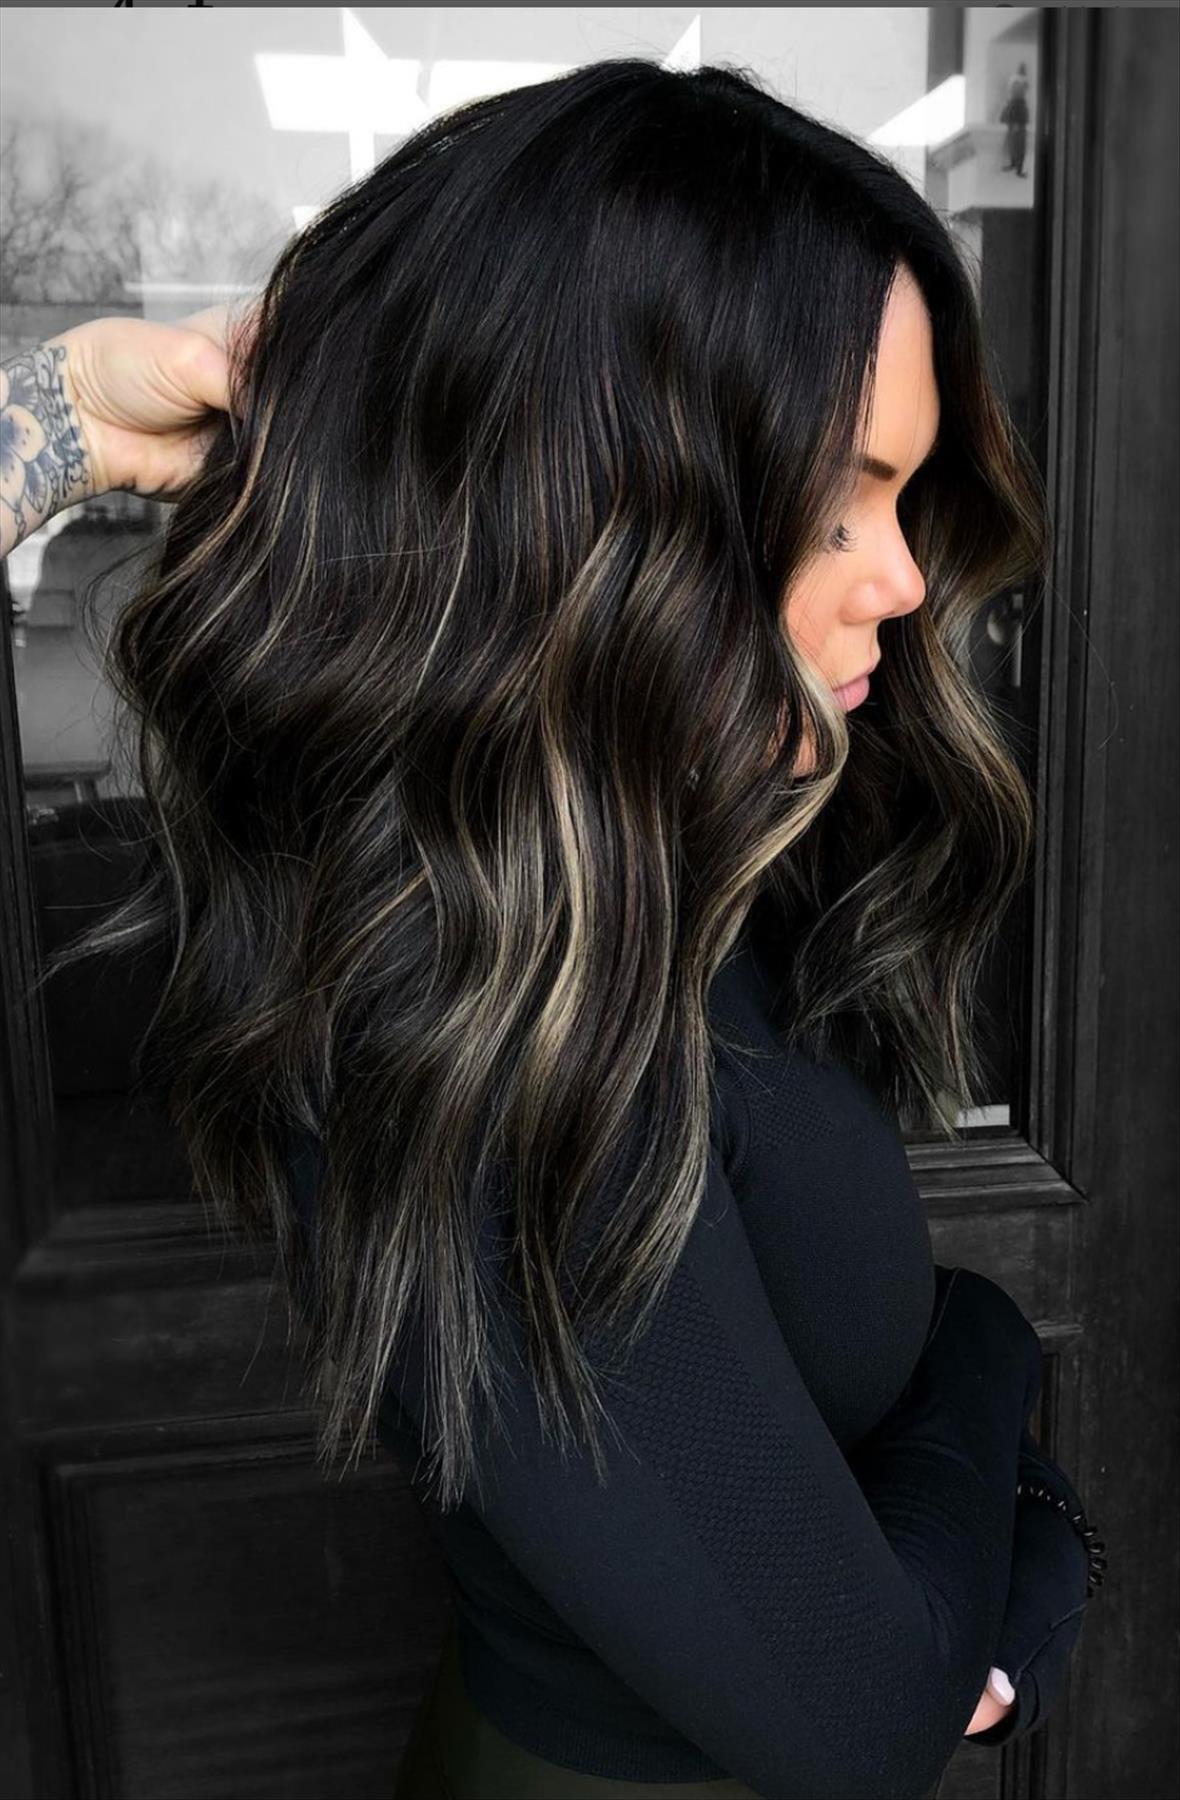 Best ways to wear highlights for black hair